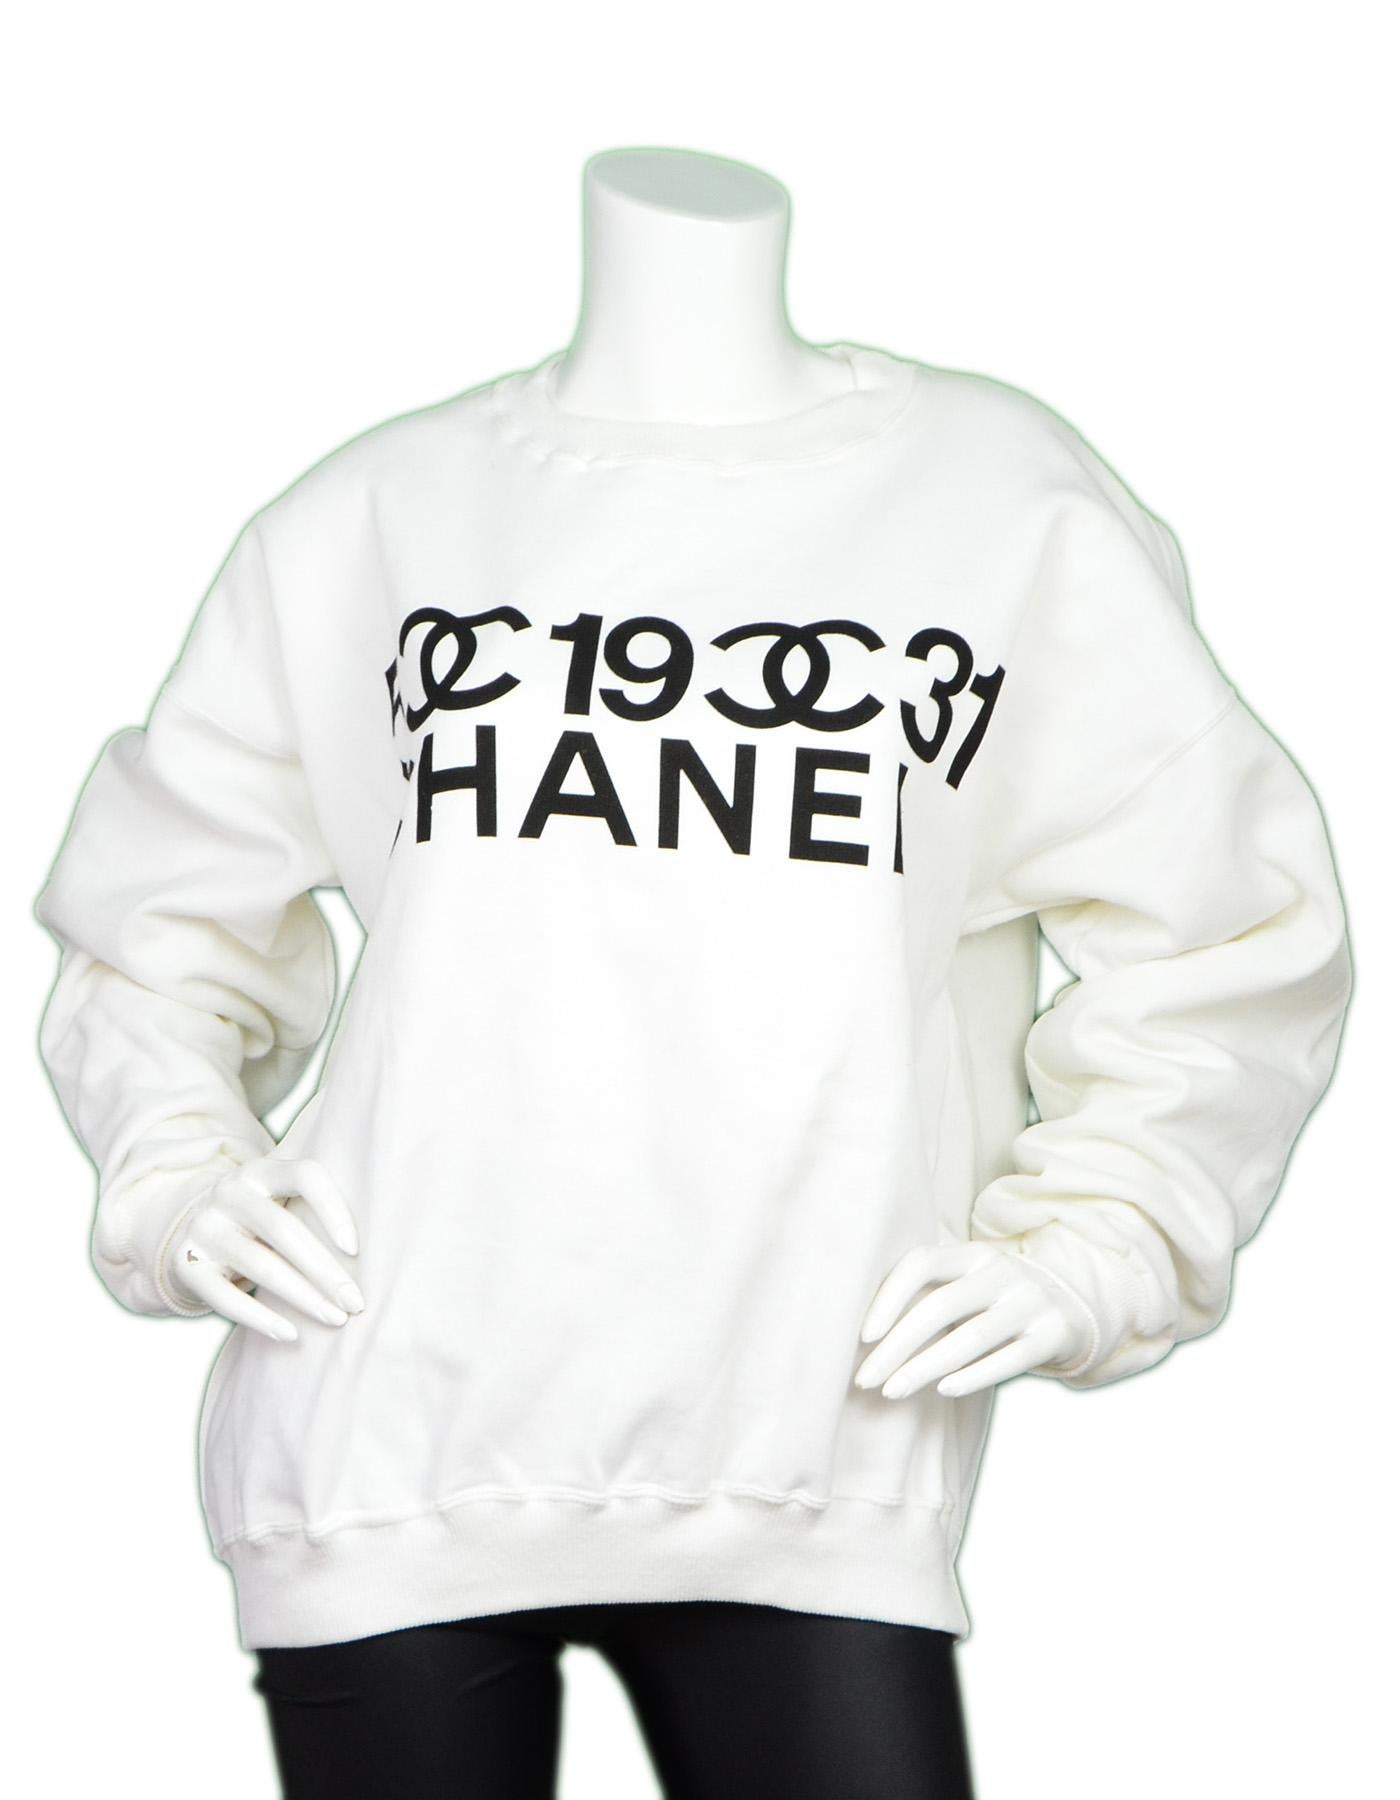 Chanel 2001 White/Black Crew Neck Logo Hoodie Sz Large

Made In: France 
Year of Production: 2001
Color: White and black
Materials: 100% cotton
Opening/Closure: Pullover
Overall Condition: Excellent pre-owned condition 
Includes: Tag and Chanel